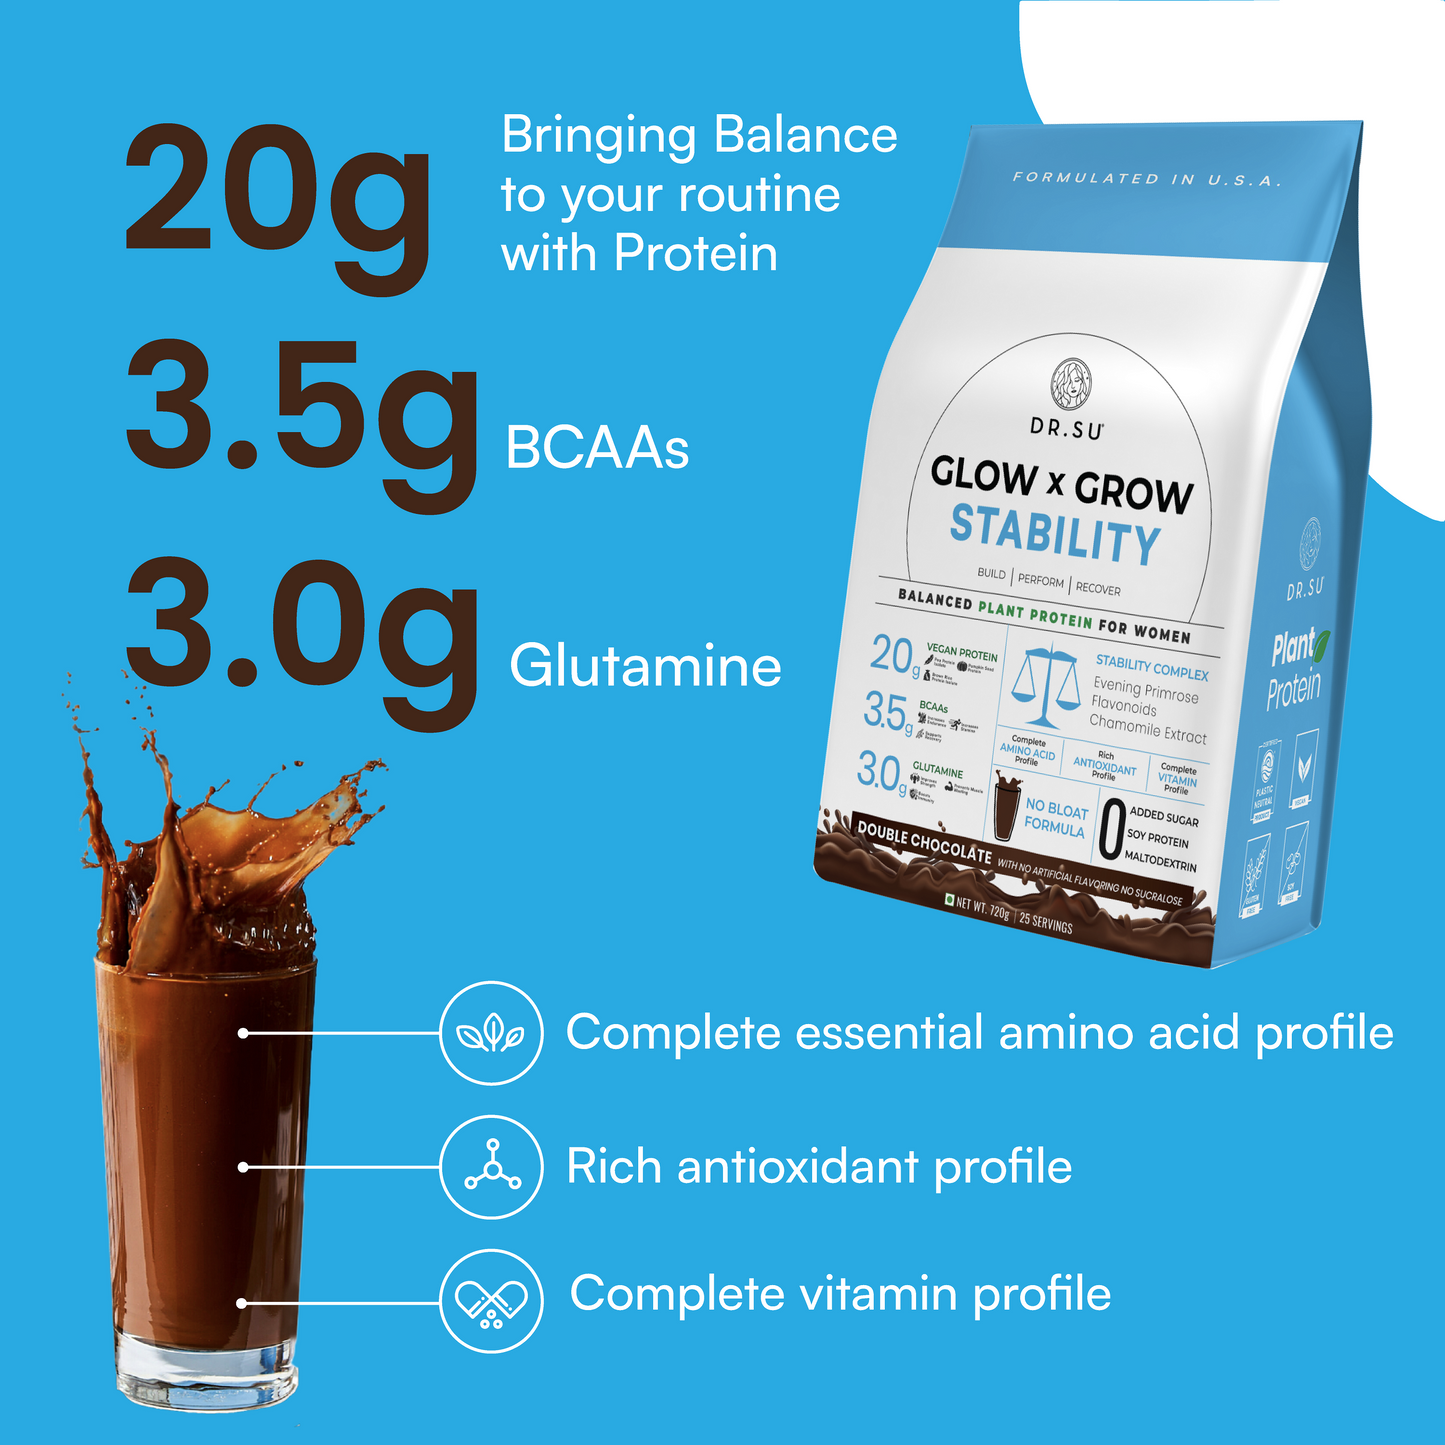 Glow x Grow: Stability Plant Protein For Women (25 Servings)